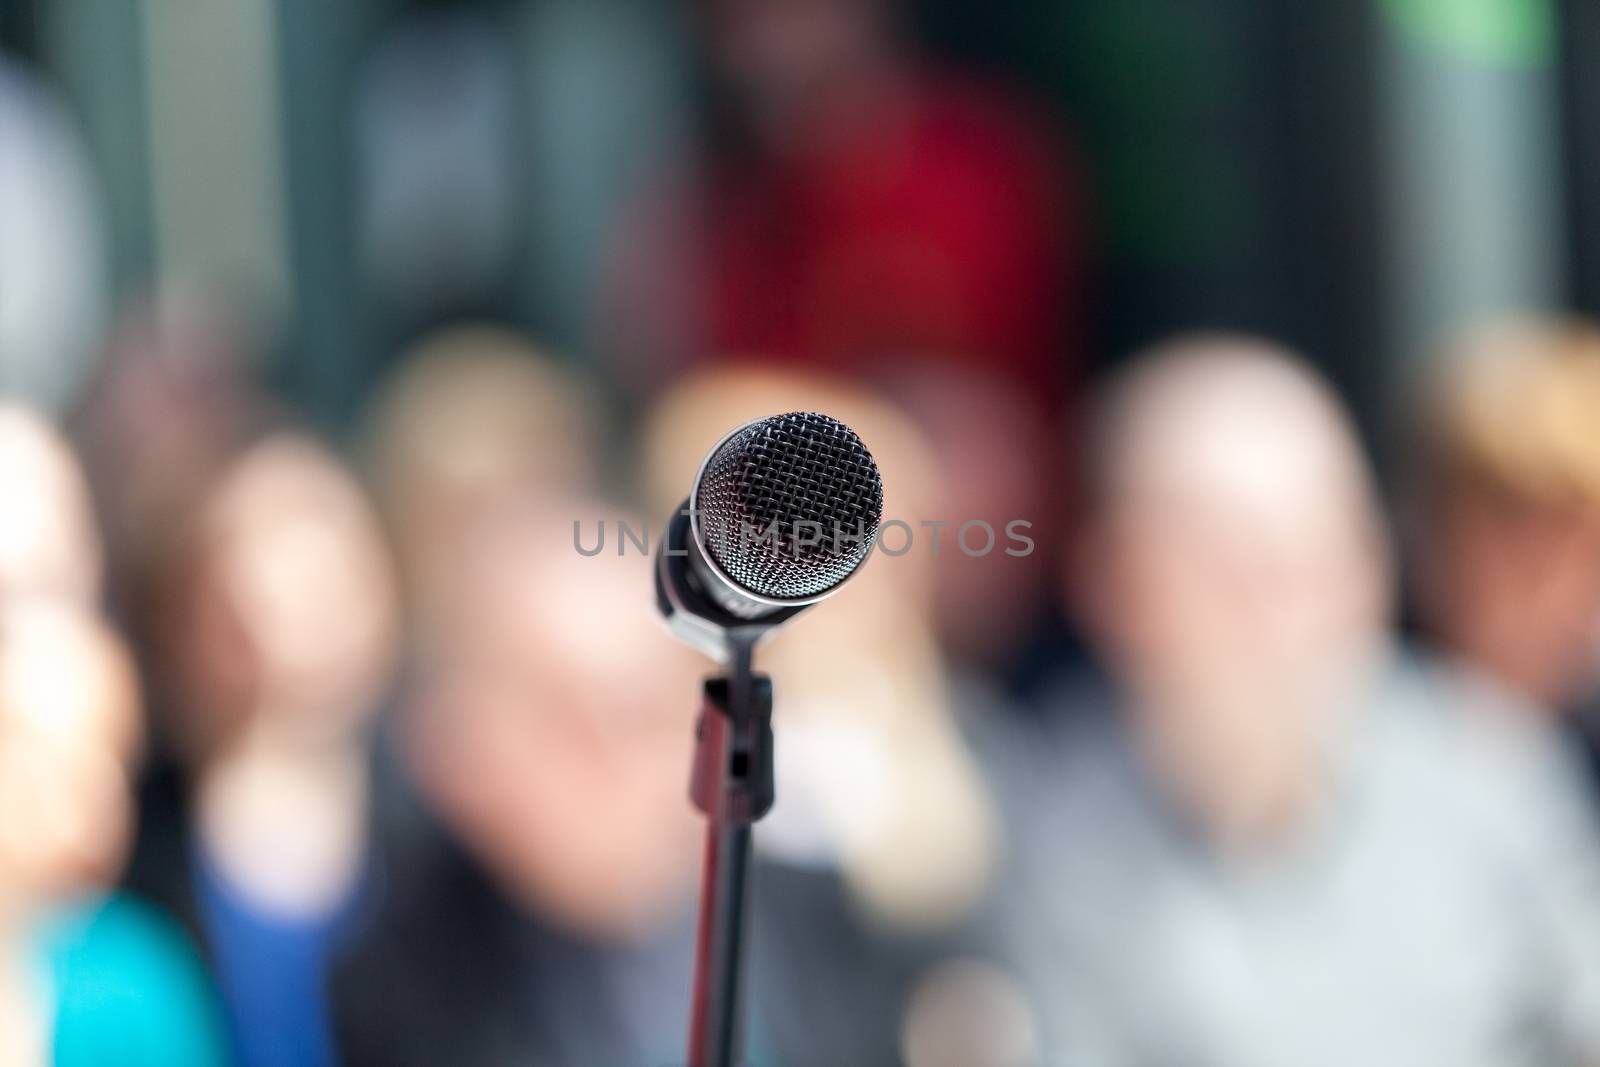 Microphone in focus, blurred audience in background by wellphoto